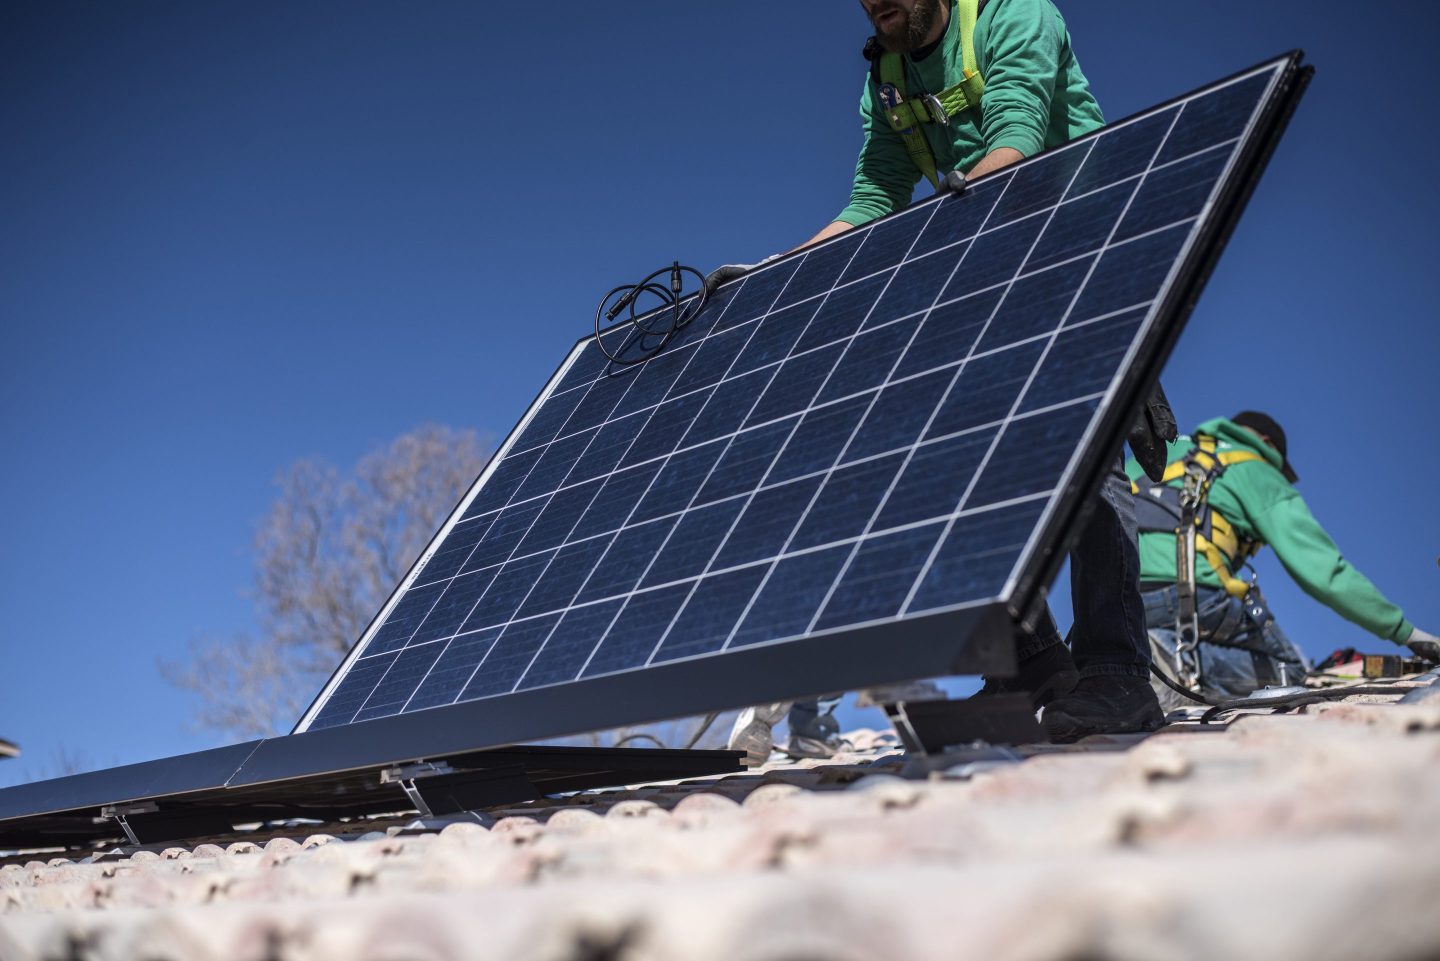 A worker lays down a solar panel on a rooftop during a SolarCity Corp. residential installation in Albuquerque, New Mexico, U.S., on Monday, Feb. 8, 2016. SolarCity is scheduled to release earnings figures on February 9. Photographer: Sergio Flores/Bloomberg via Getty Images